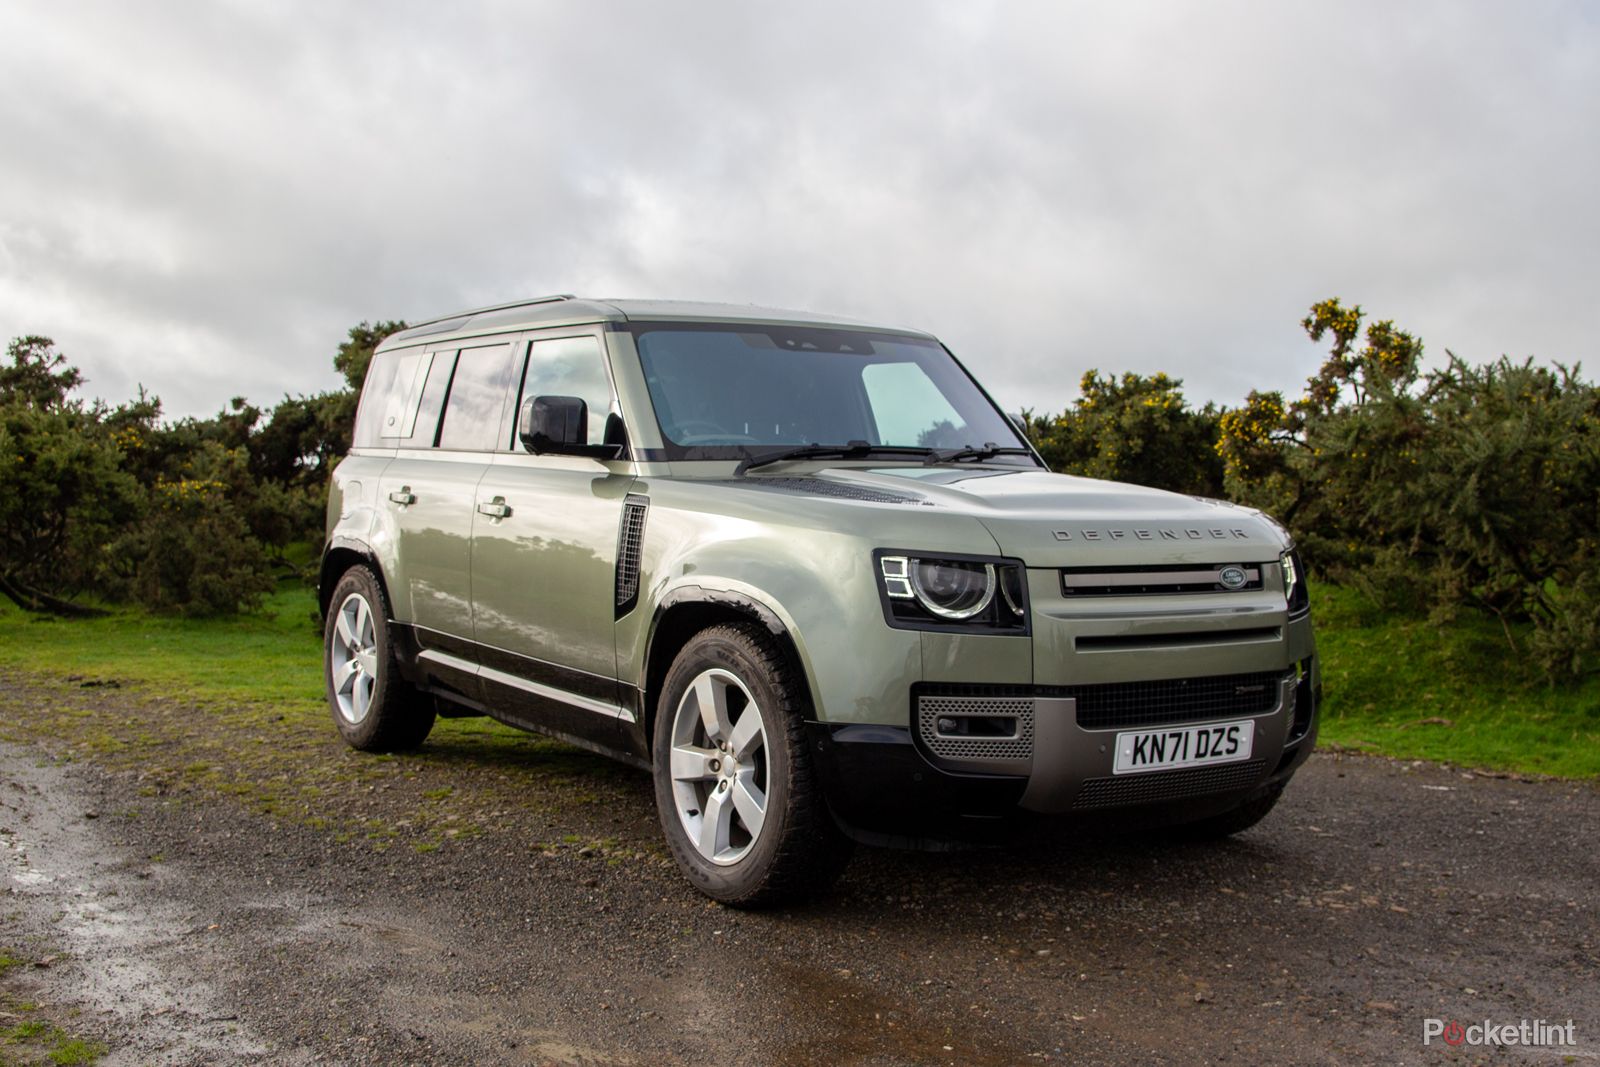 Land Rover Defender 110 PHEV review: A new breed